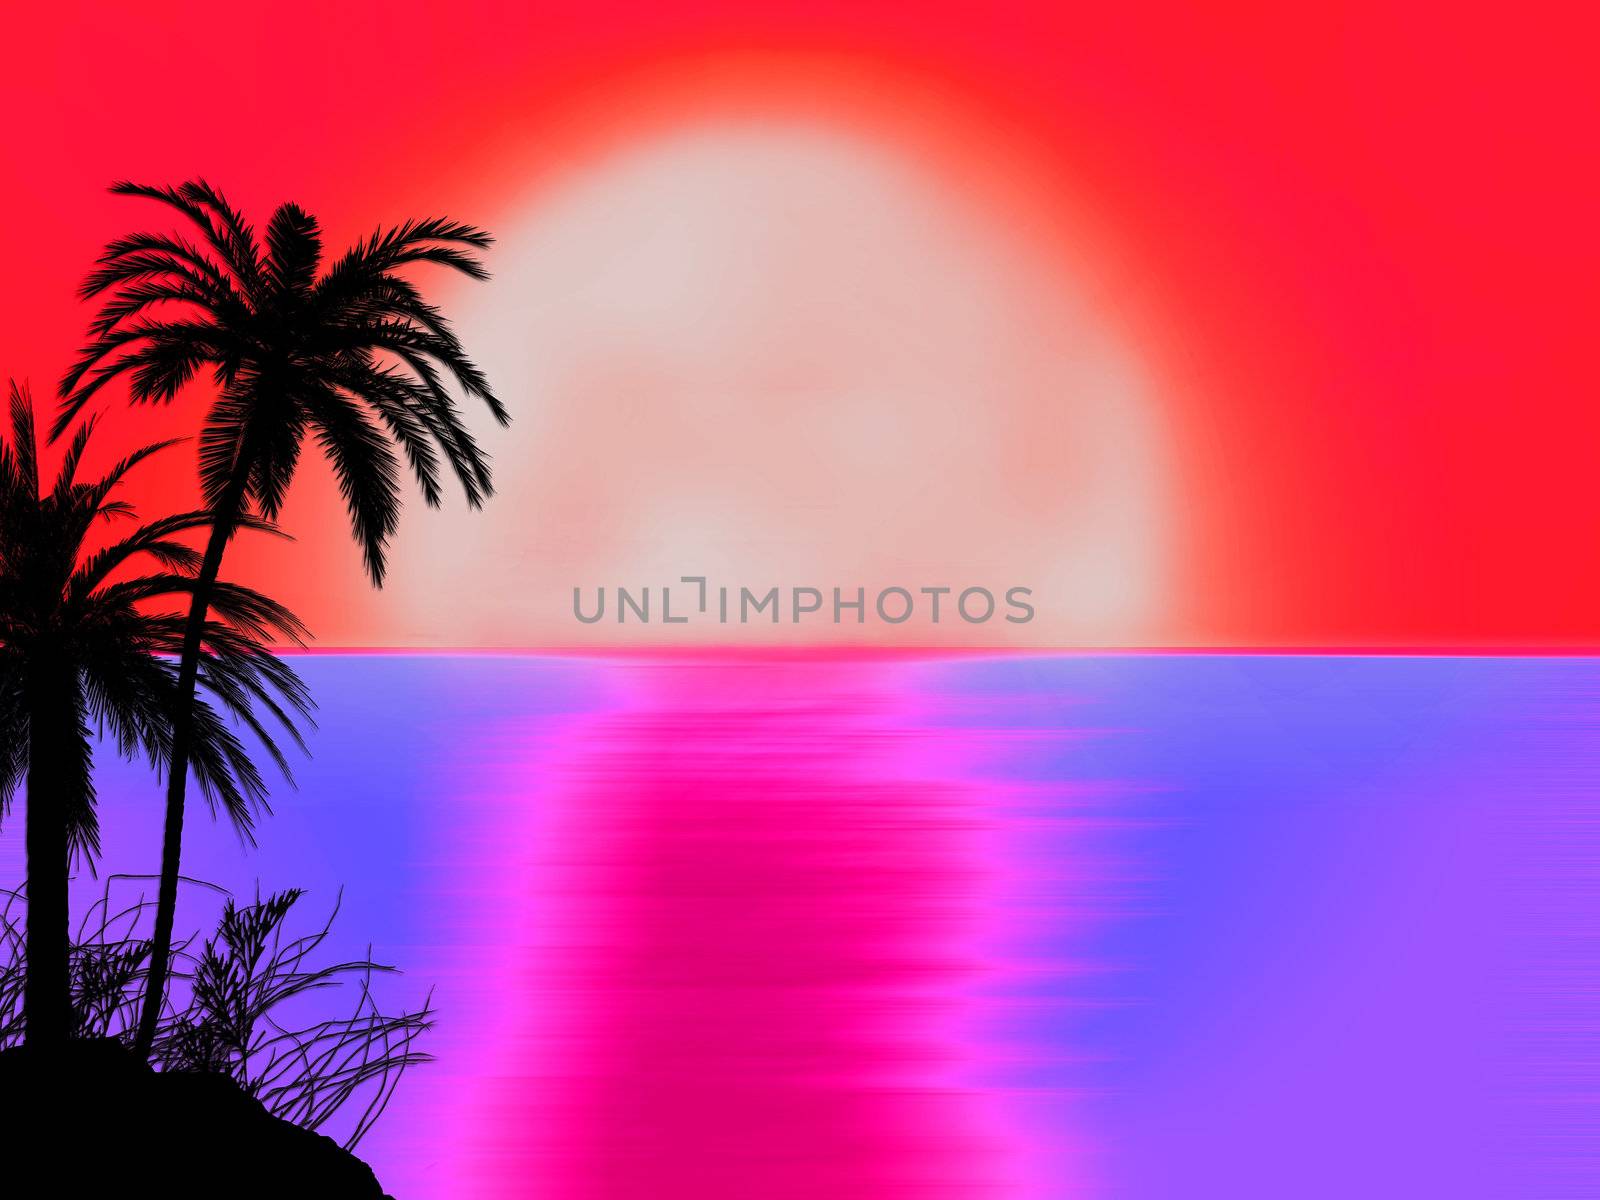 miami 70s style red dusk sunset sunrise with tree silhouette illustration